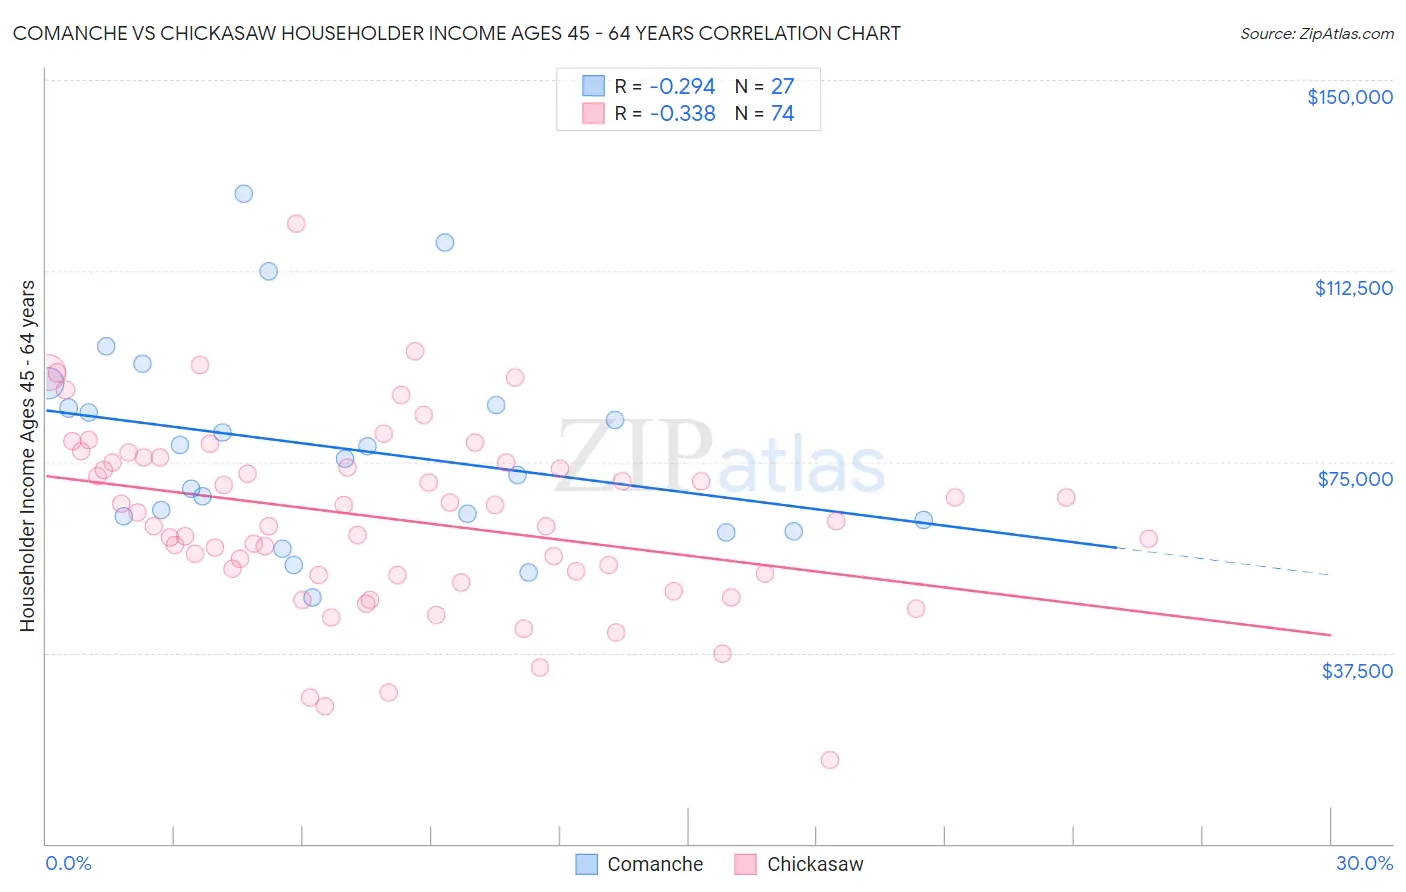 Comanche vs Chickasaw Householder Income Ages 45 - 64 years